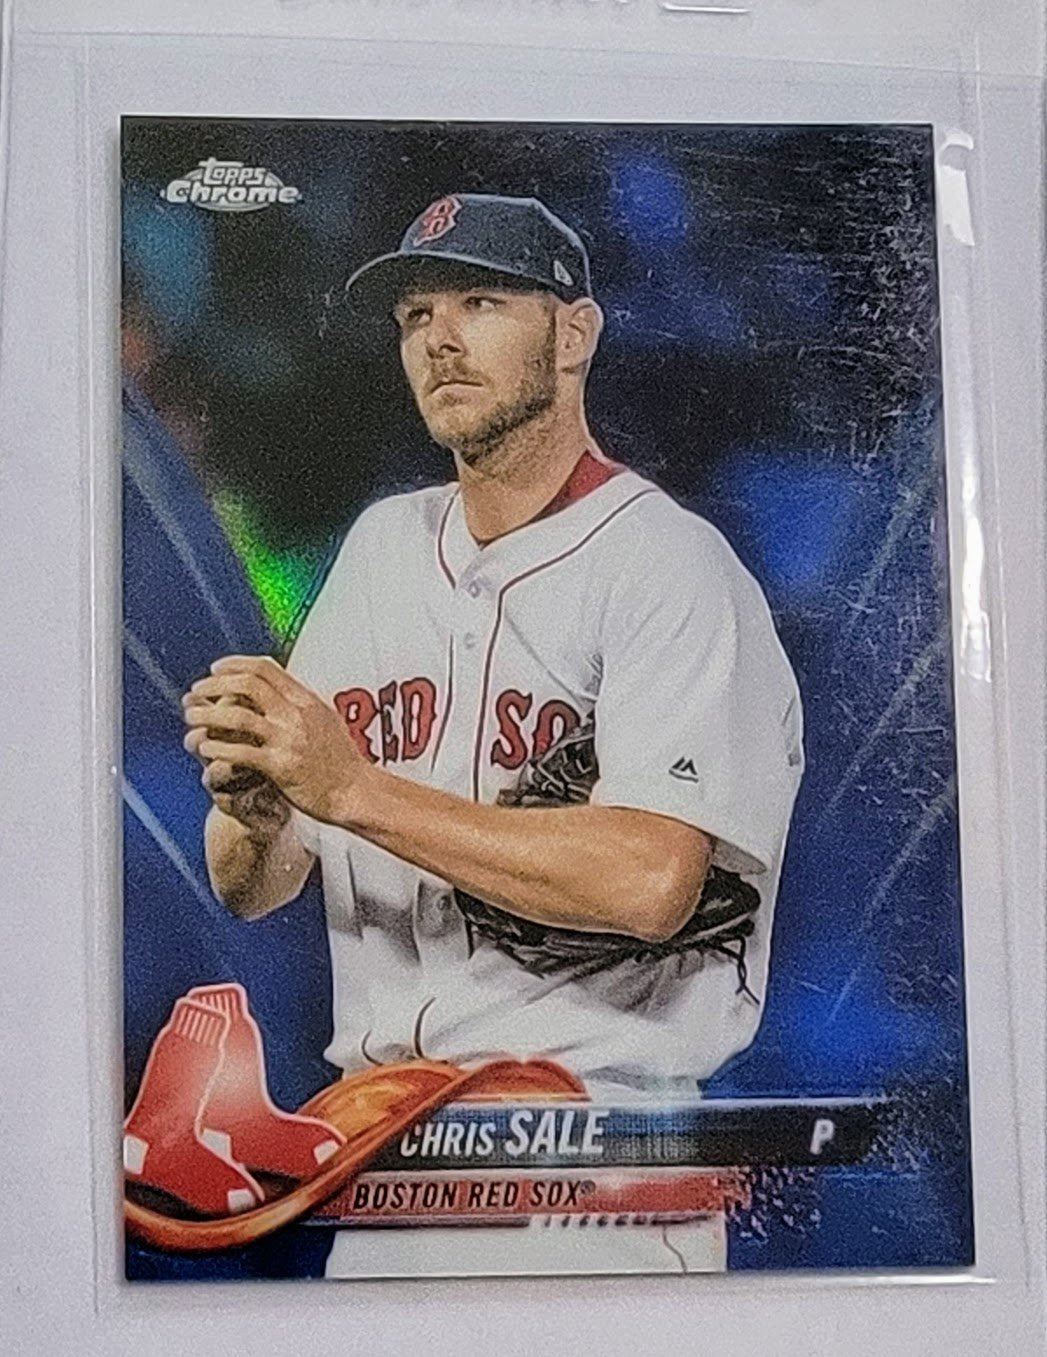 2018 Topps Chrome Chris Sale Blue Refractor Baseball Card TPTV simple Xclusive Collectibles   